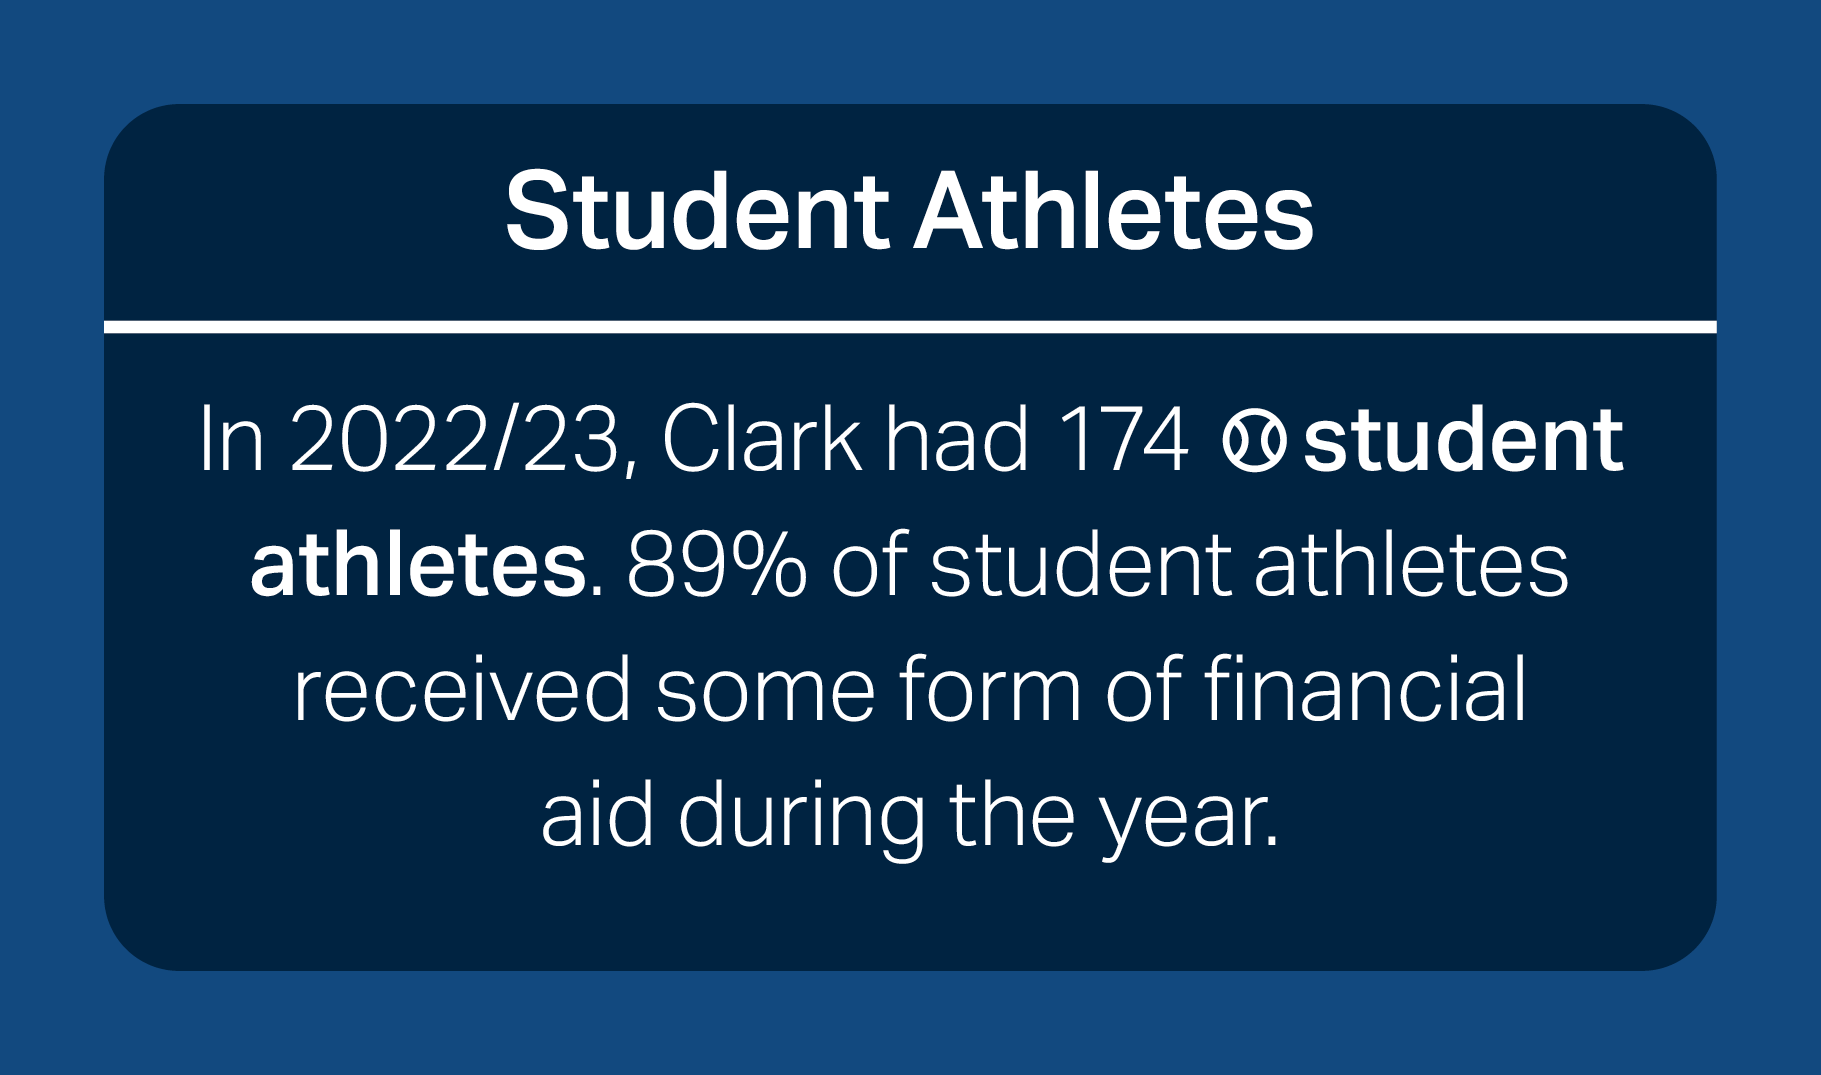 Student athletics. In 20/22/23, clark had at 174 student athletes. 89% of student athletes received some form of financial aid during the year